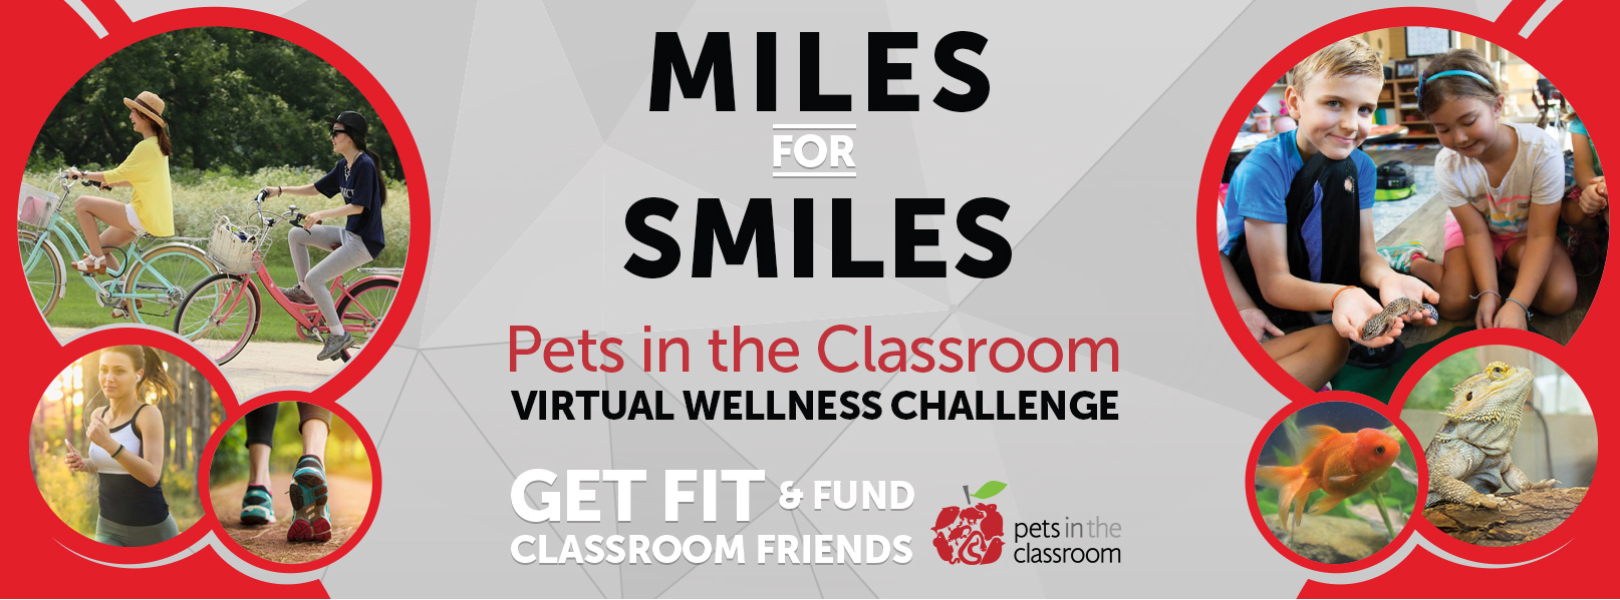 Miles for Smiles - Pets in the Classroom Virtual Wellness Challenge